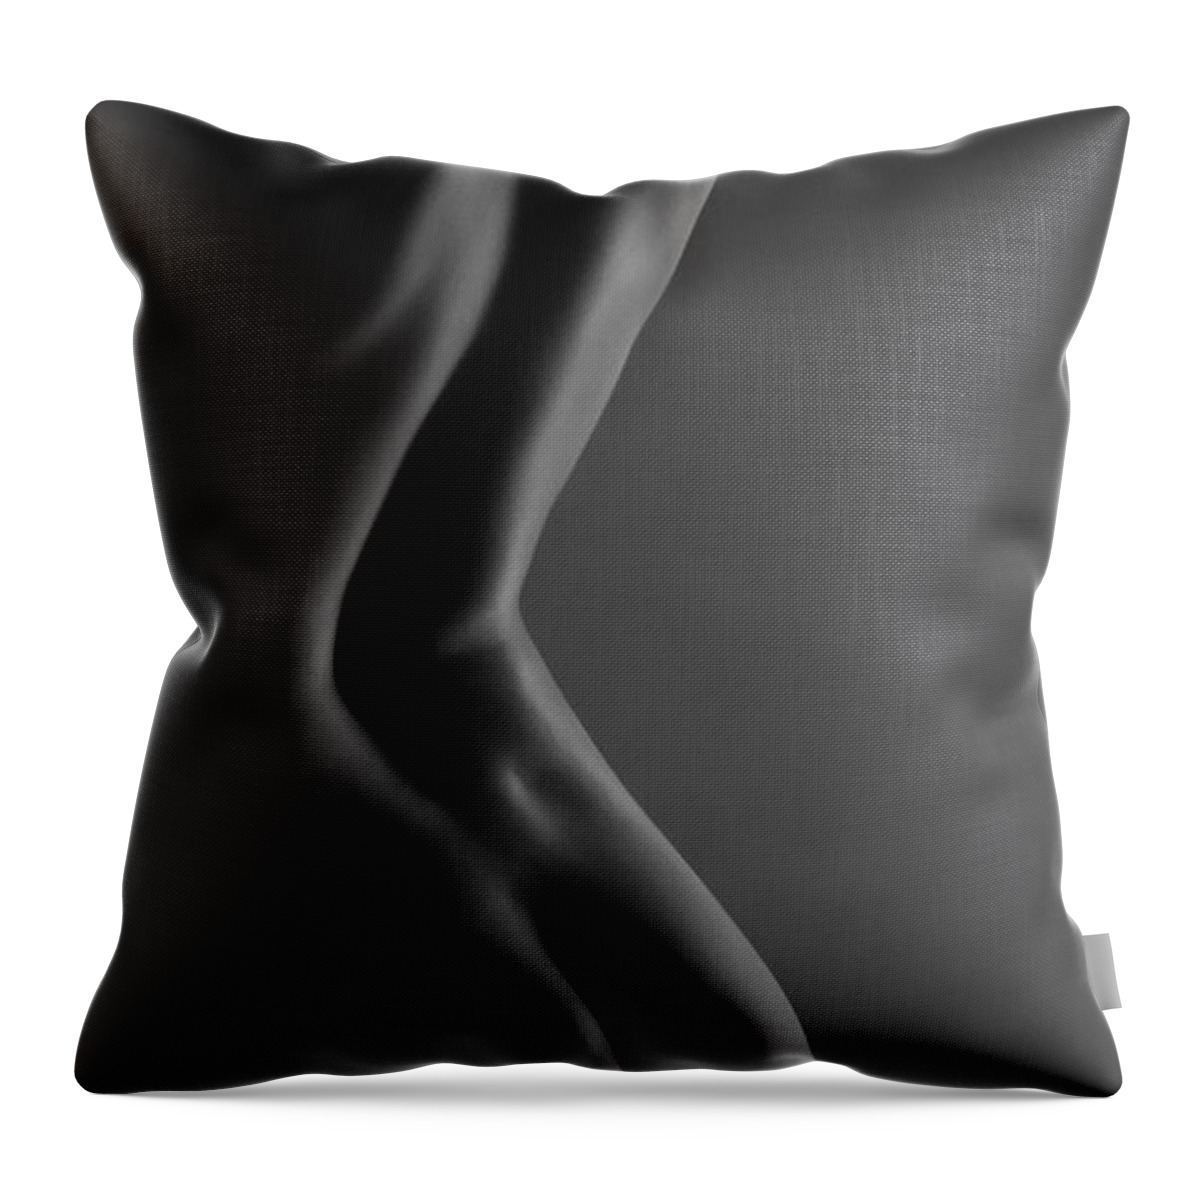 Blue Muse Fine Art Throw Pillow featuring the photograph Beautiful Bodyscape by Blue Muse Fine Art